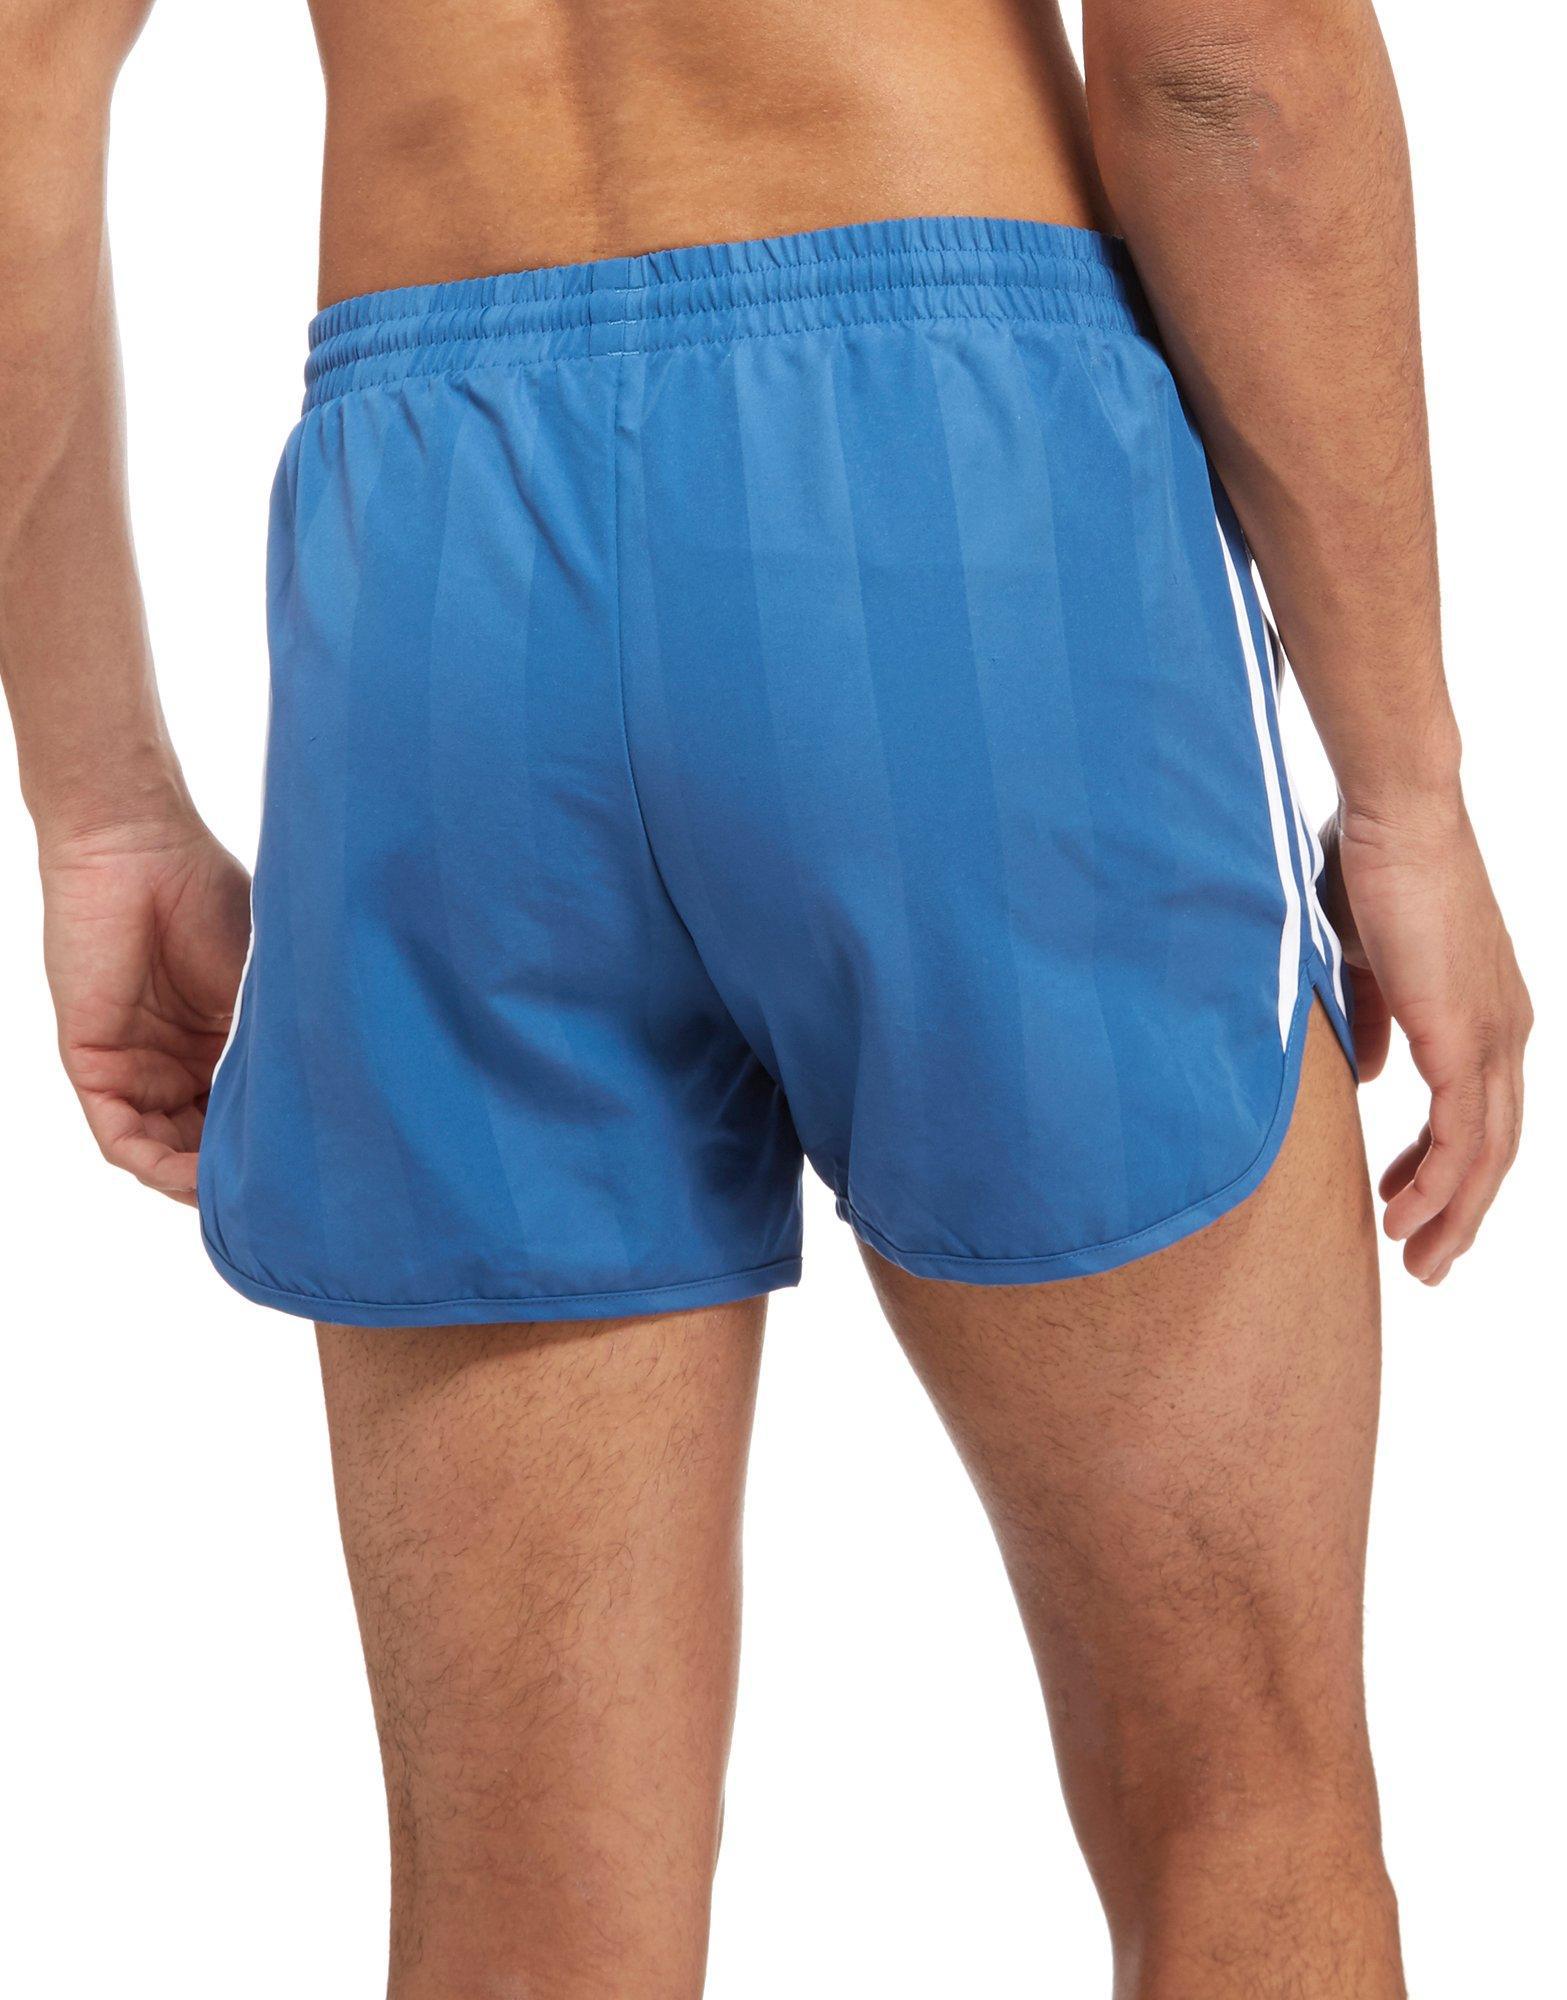 adidas Originals Synthetic Cali Football Shorts in Blue for Men - Lyst